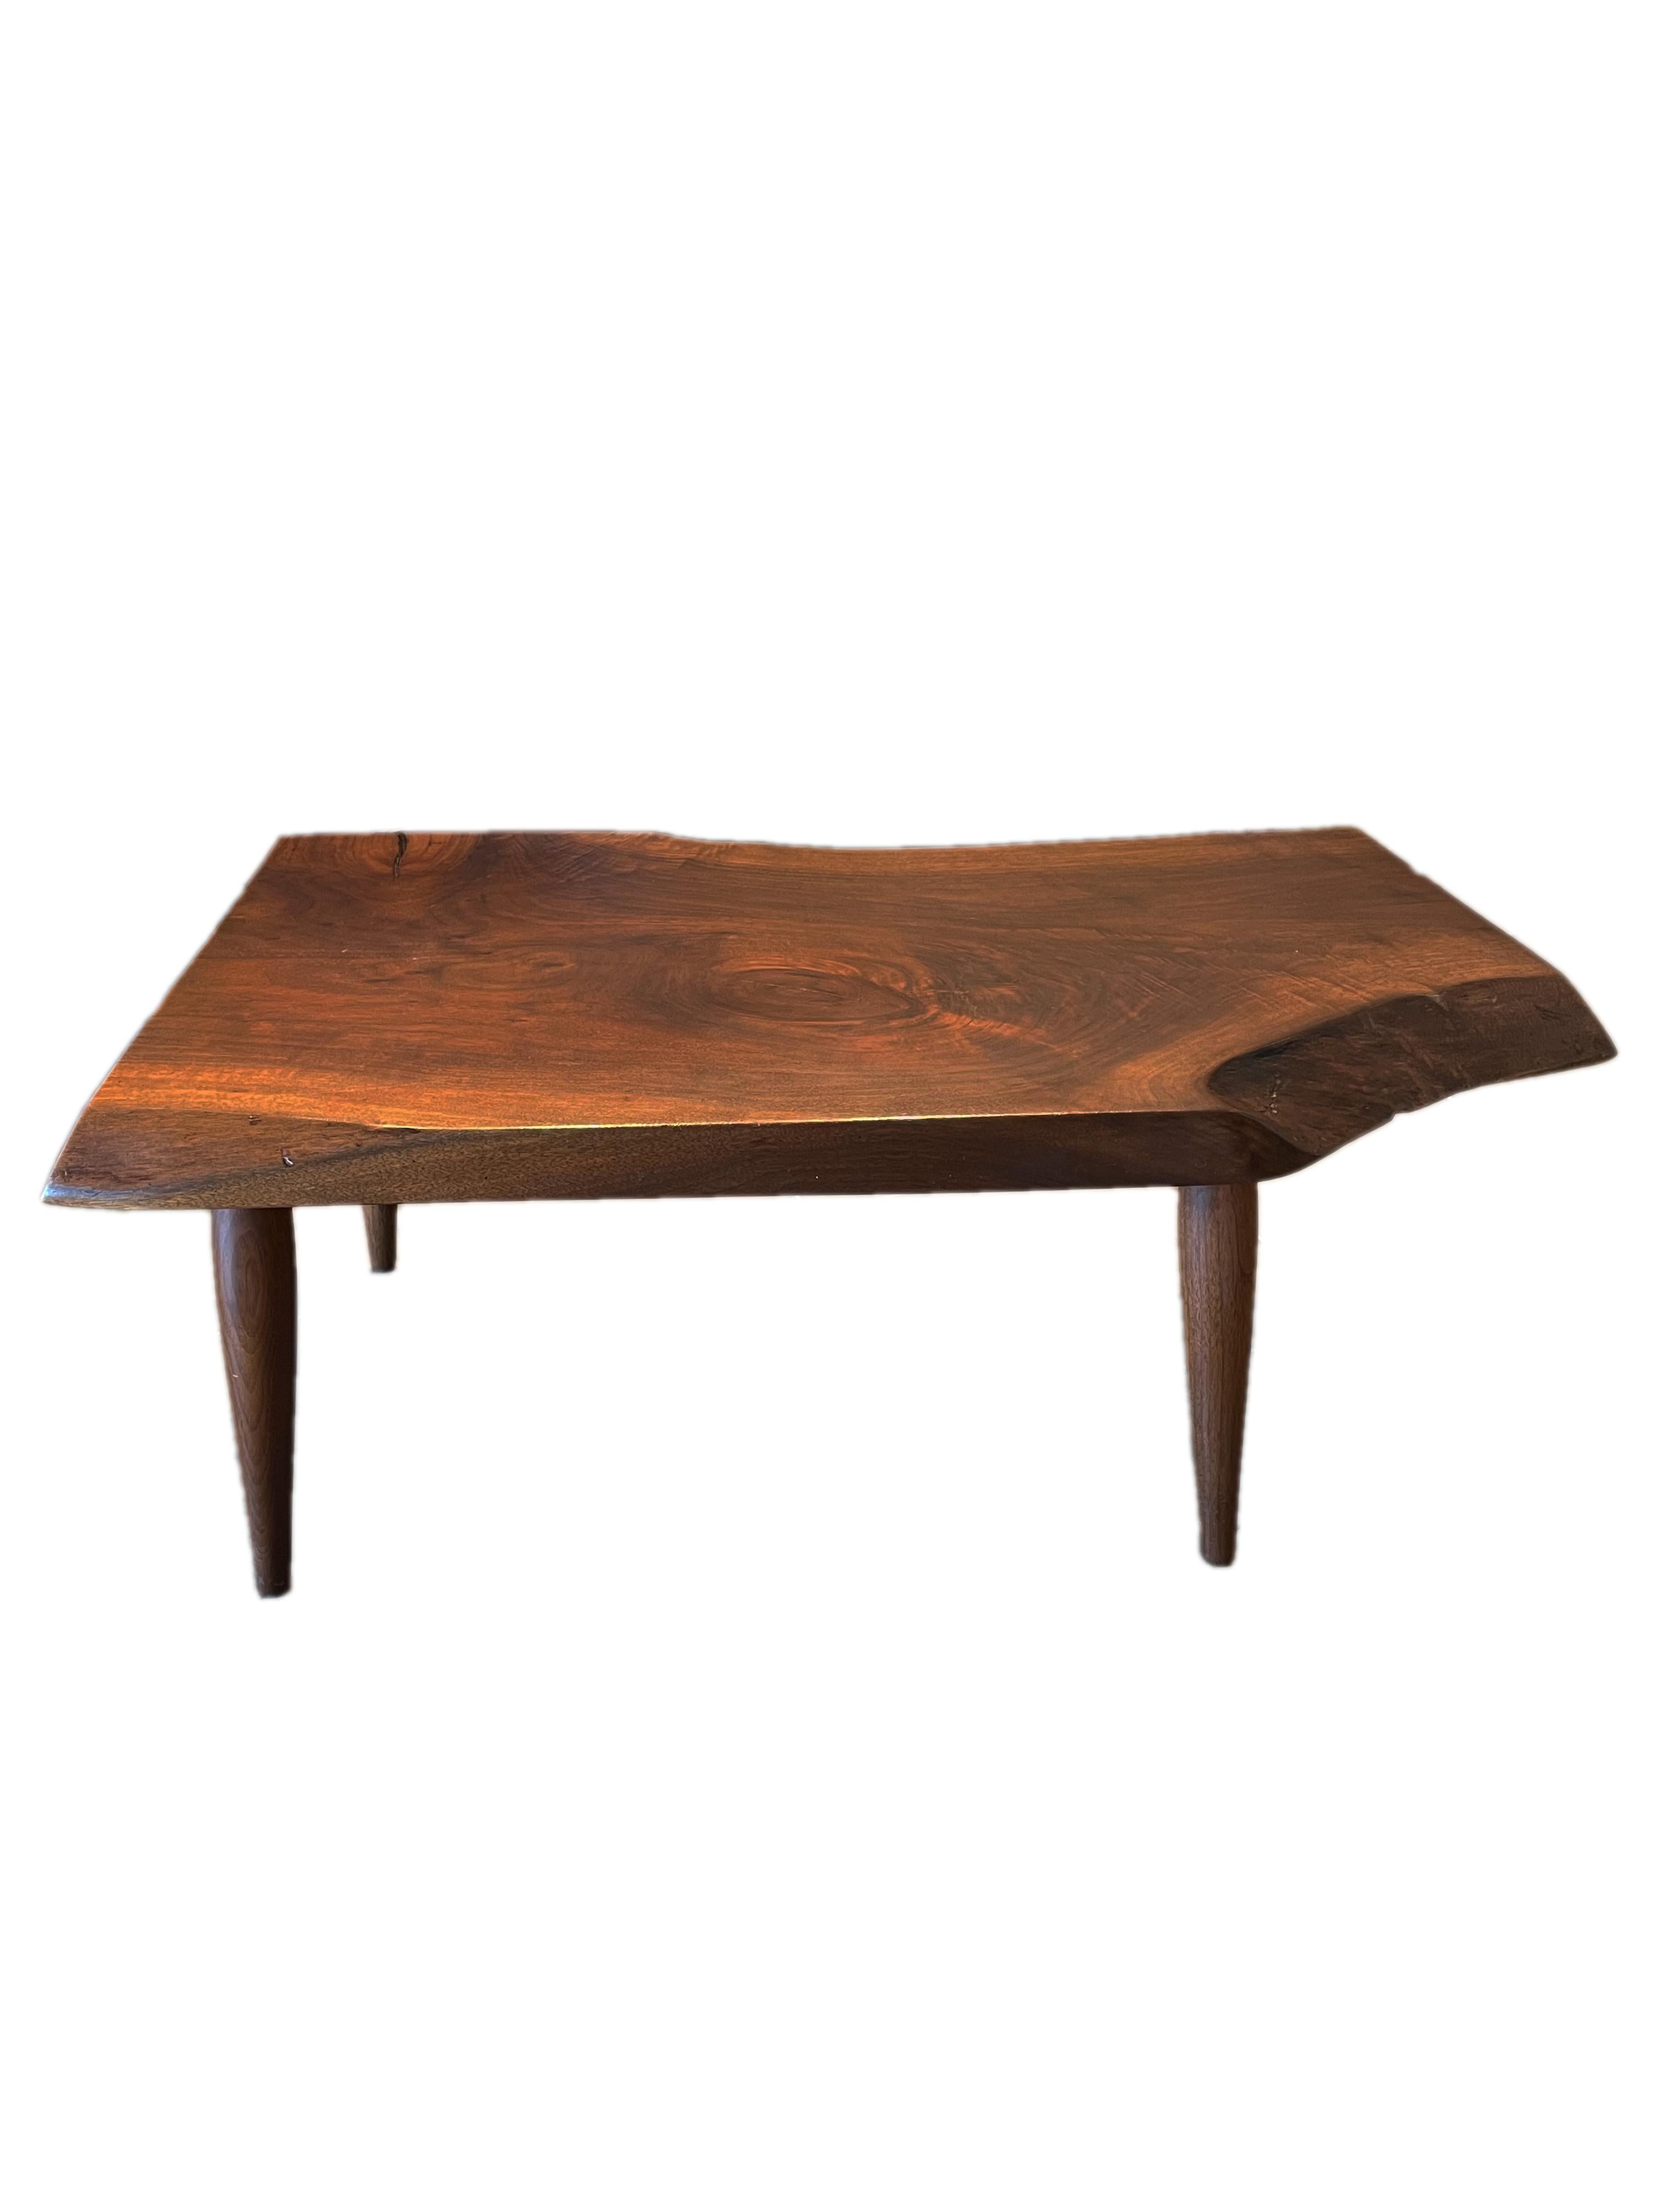 Mid-Century American Studio Walnut Live Edge Slab Coffee Table by, James Martin  In Good Condition For Sale In Englewood, NJ